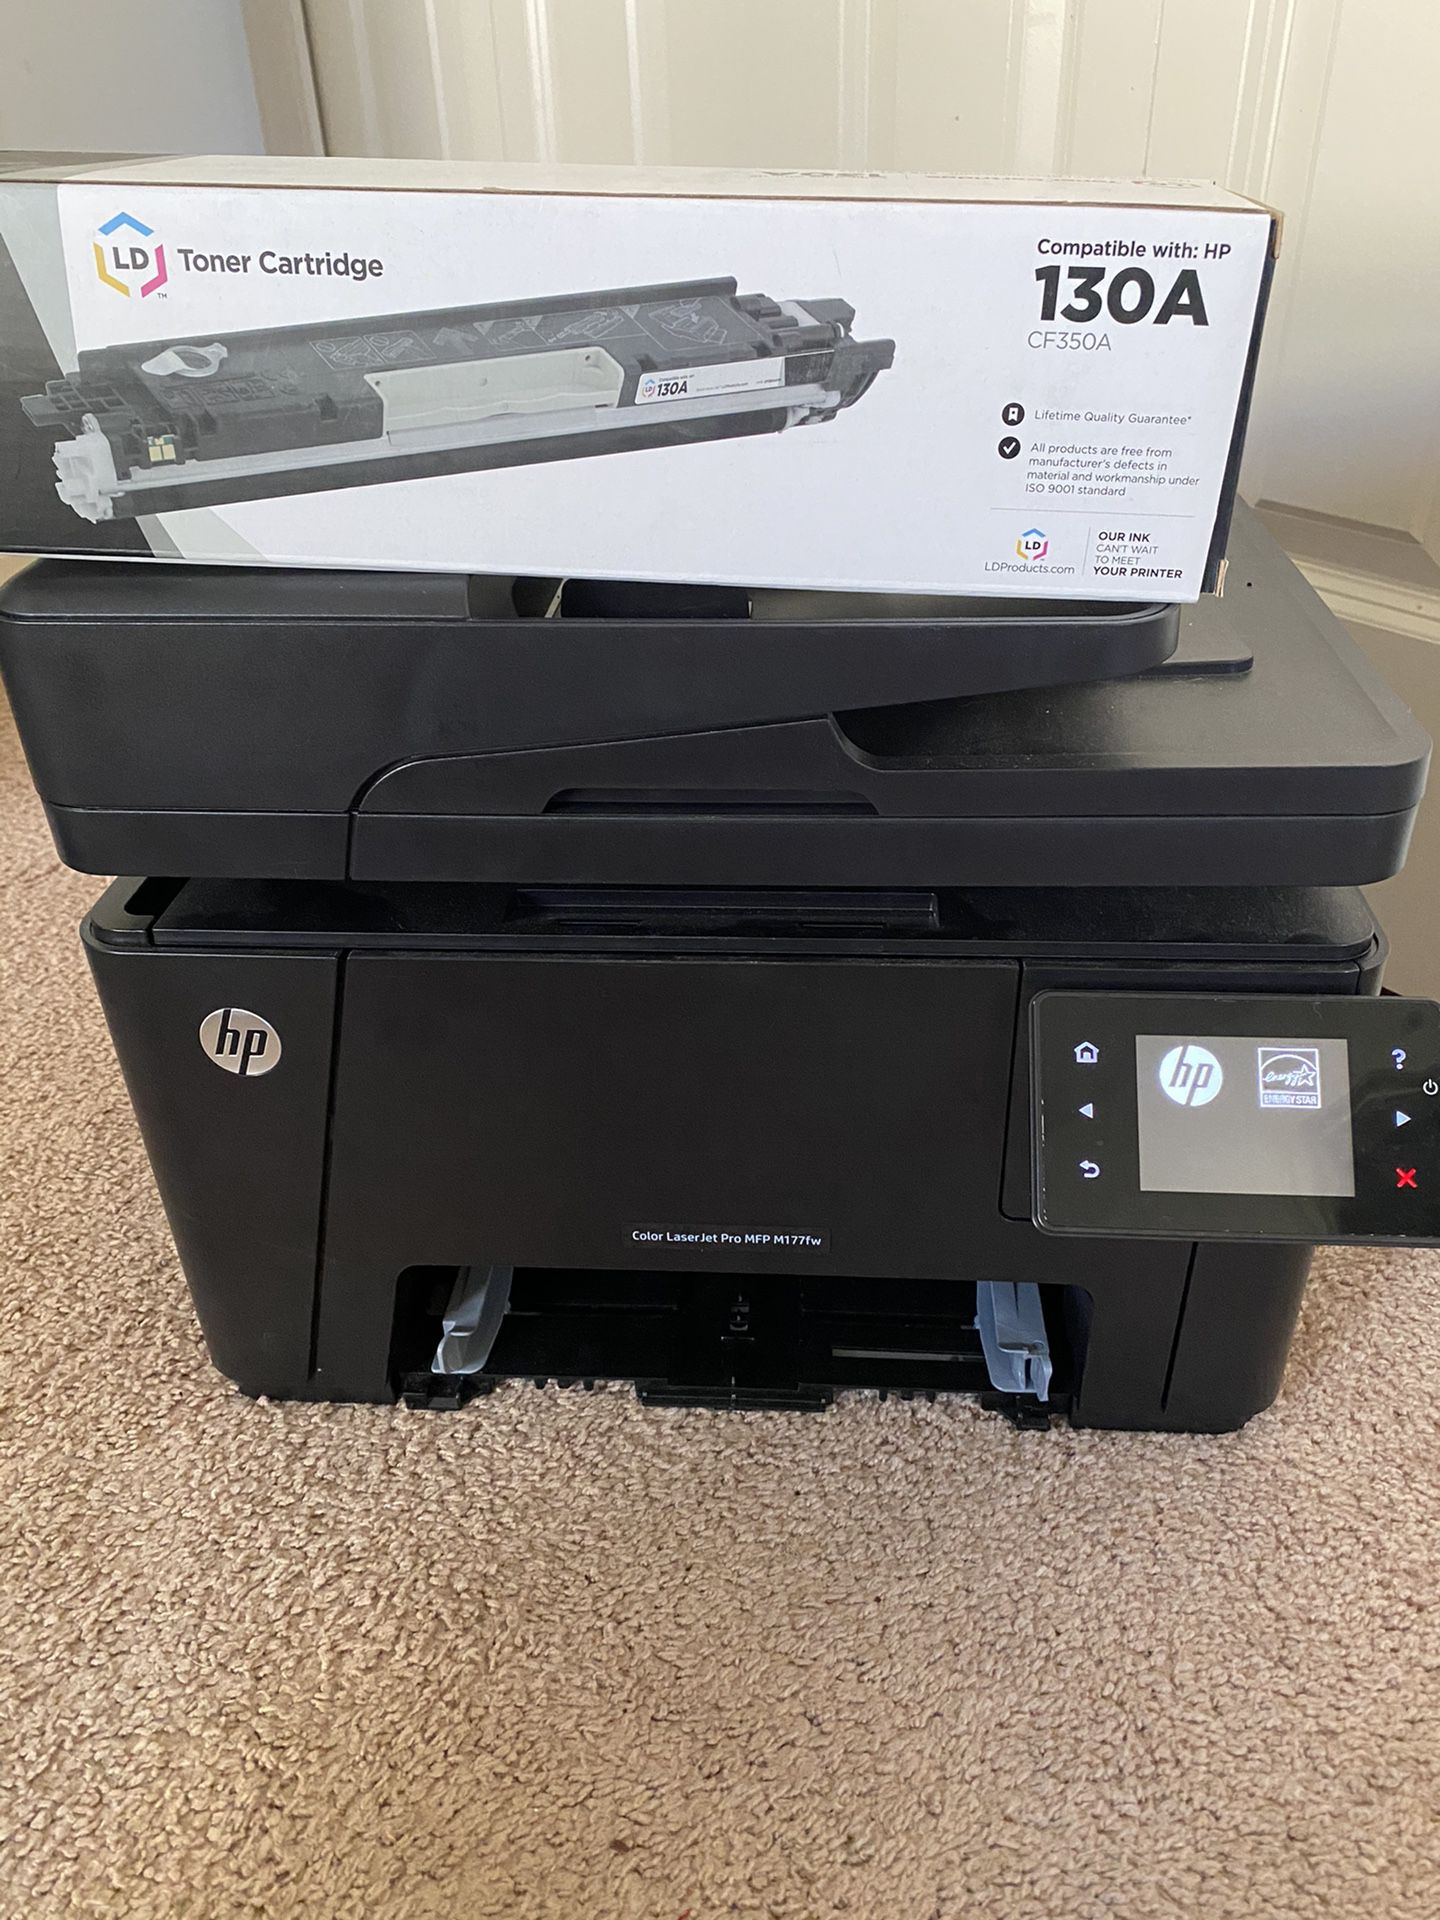 HP M177 all in one printer